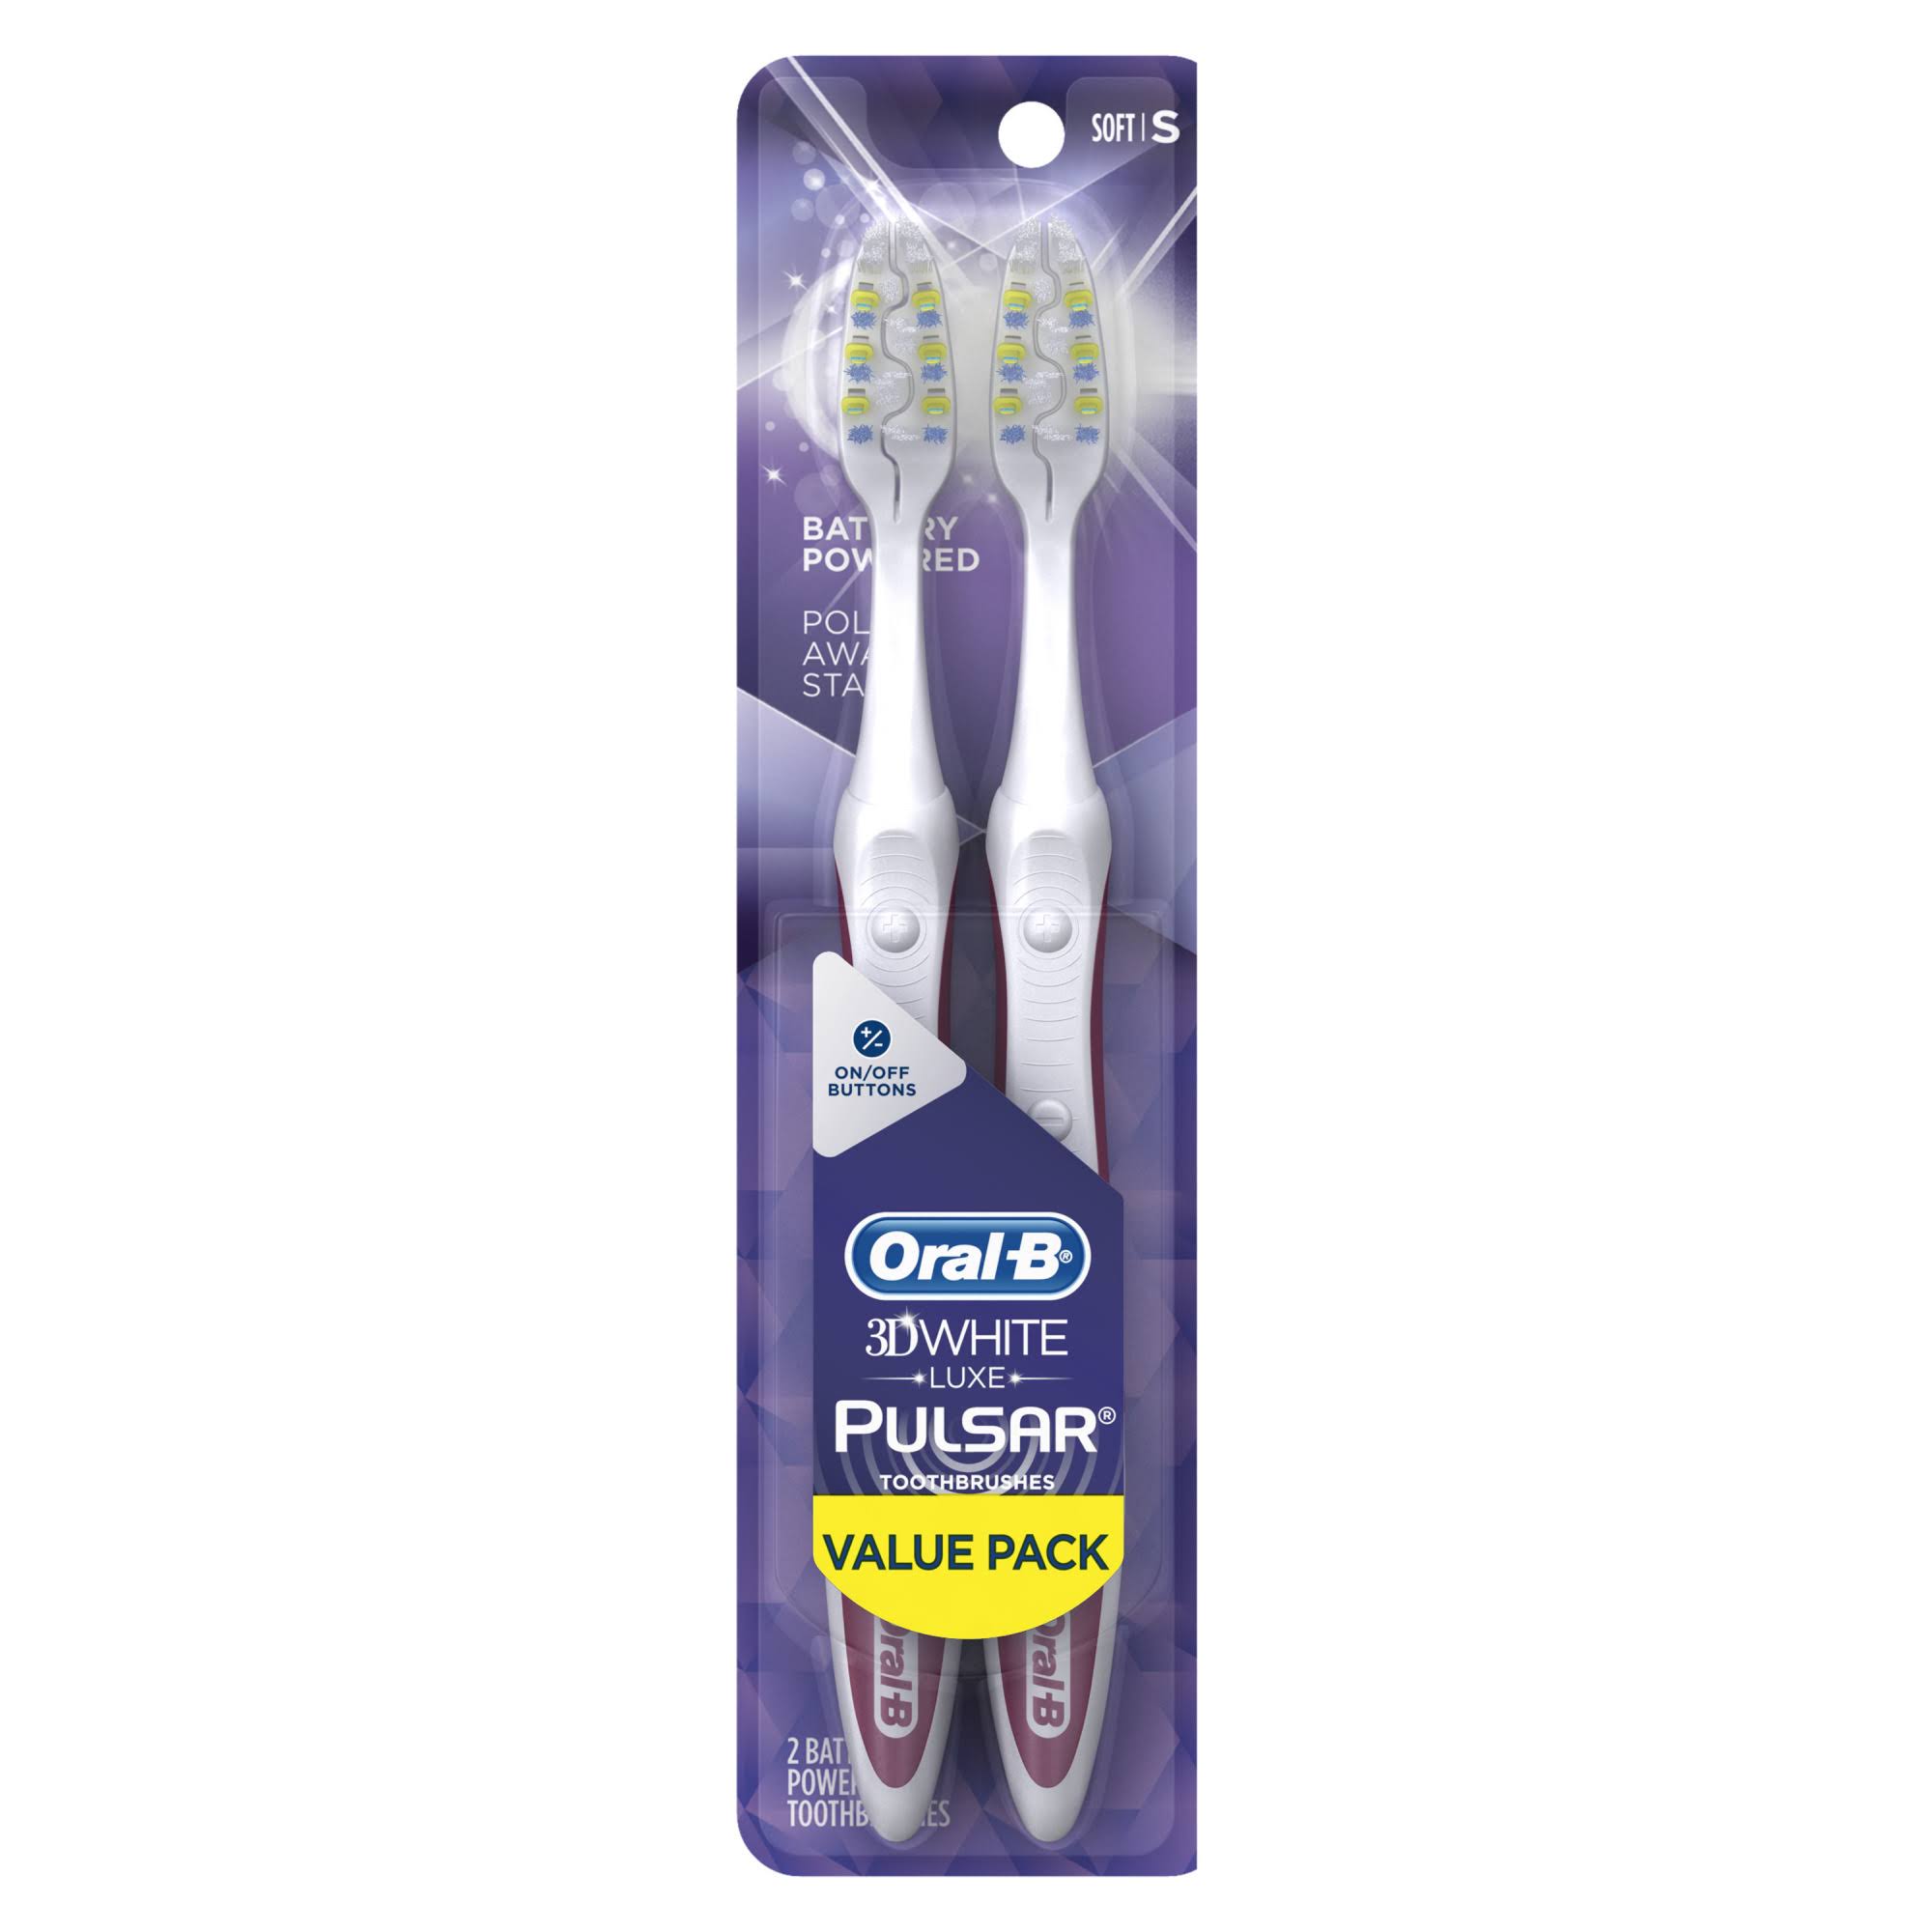 Oral-B 3D White Luxe Pulsar Toothbrushes Value Pack - Soft S, 2pk